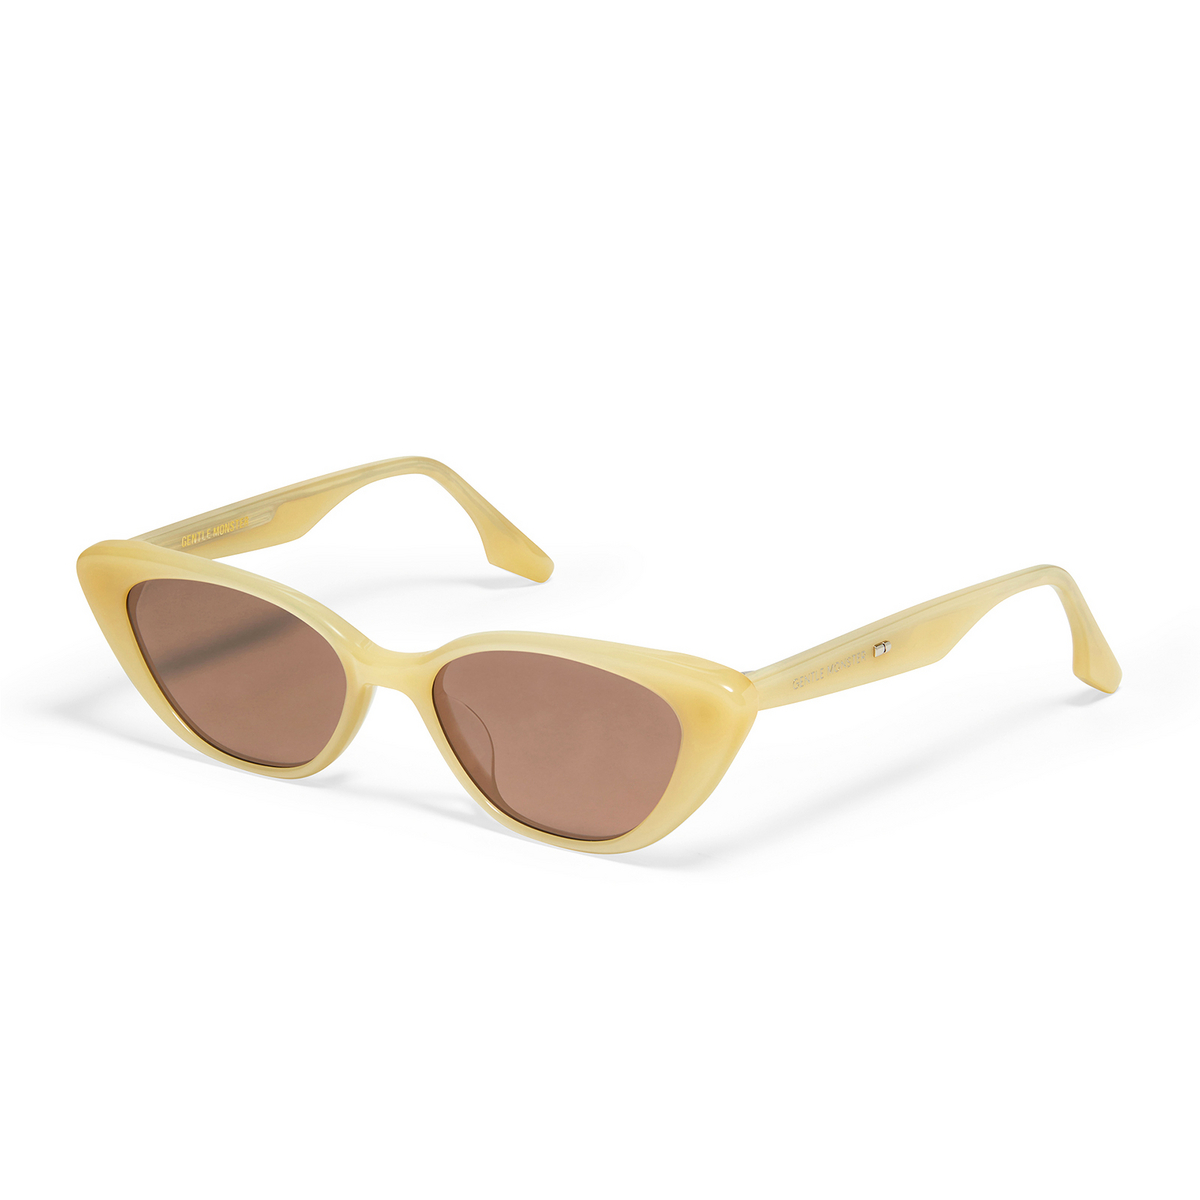 Gentle Monster® Cat-eye Sunglasses: Crella color Yellow Y1 - three-quarters view.